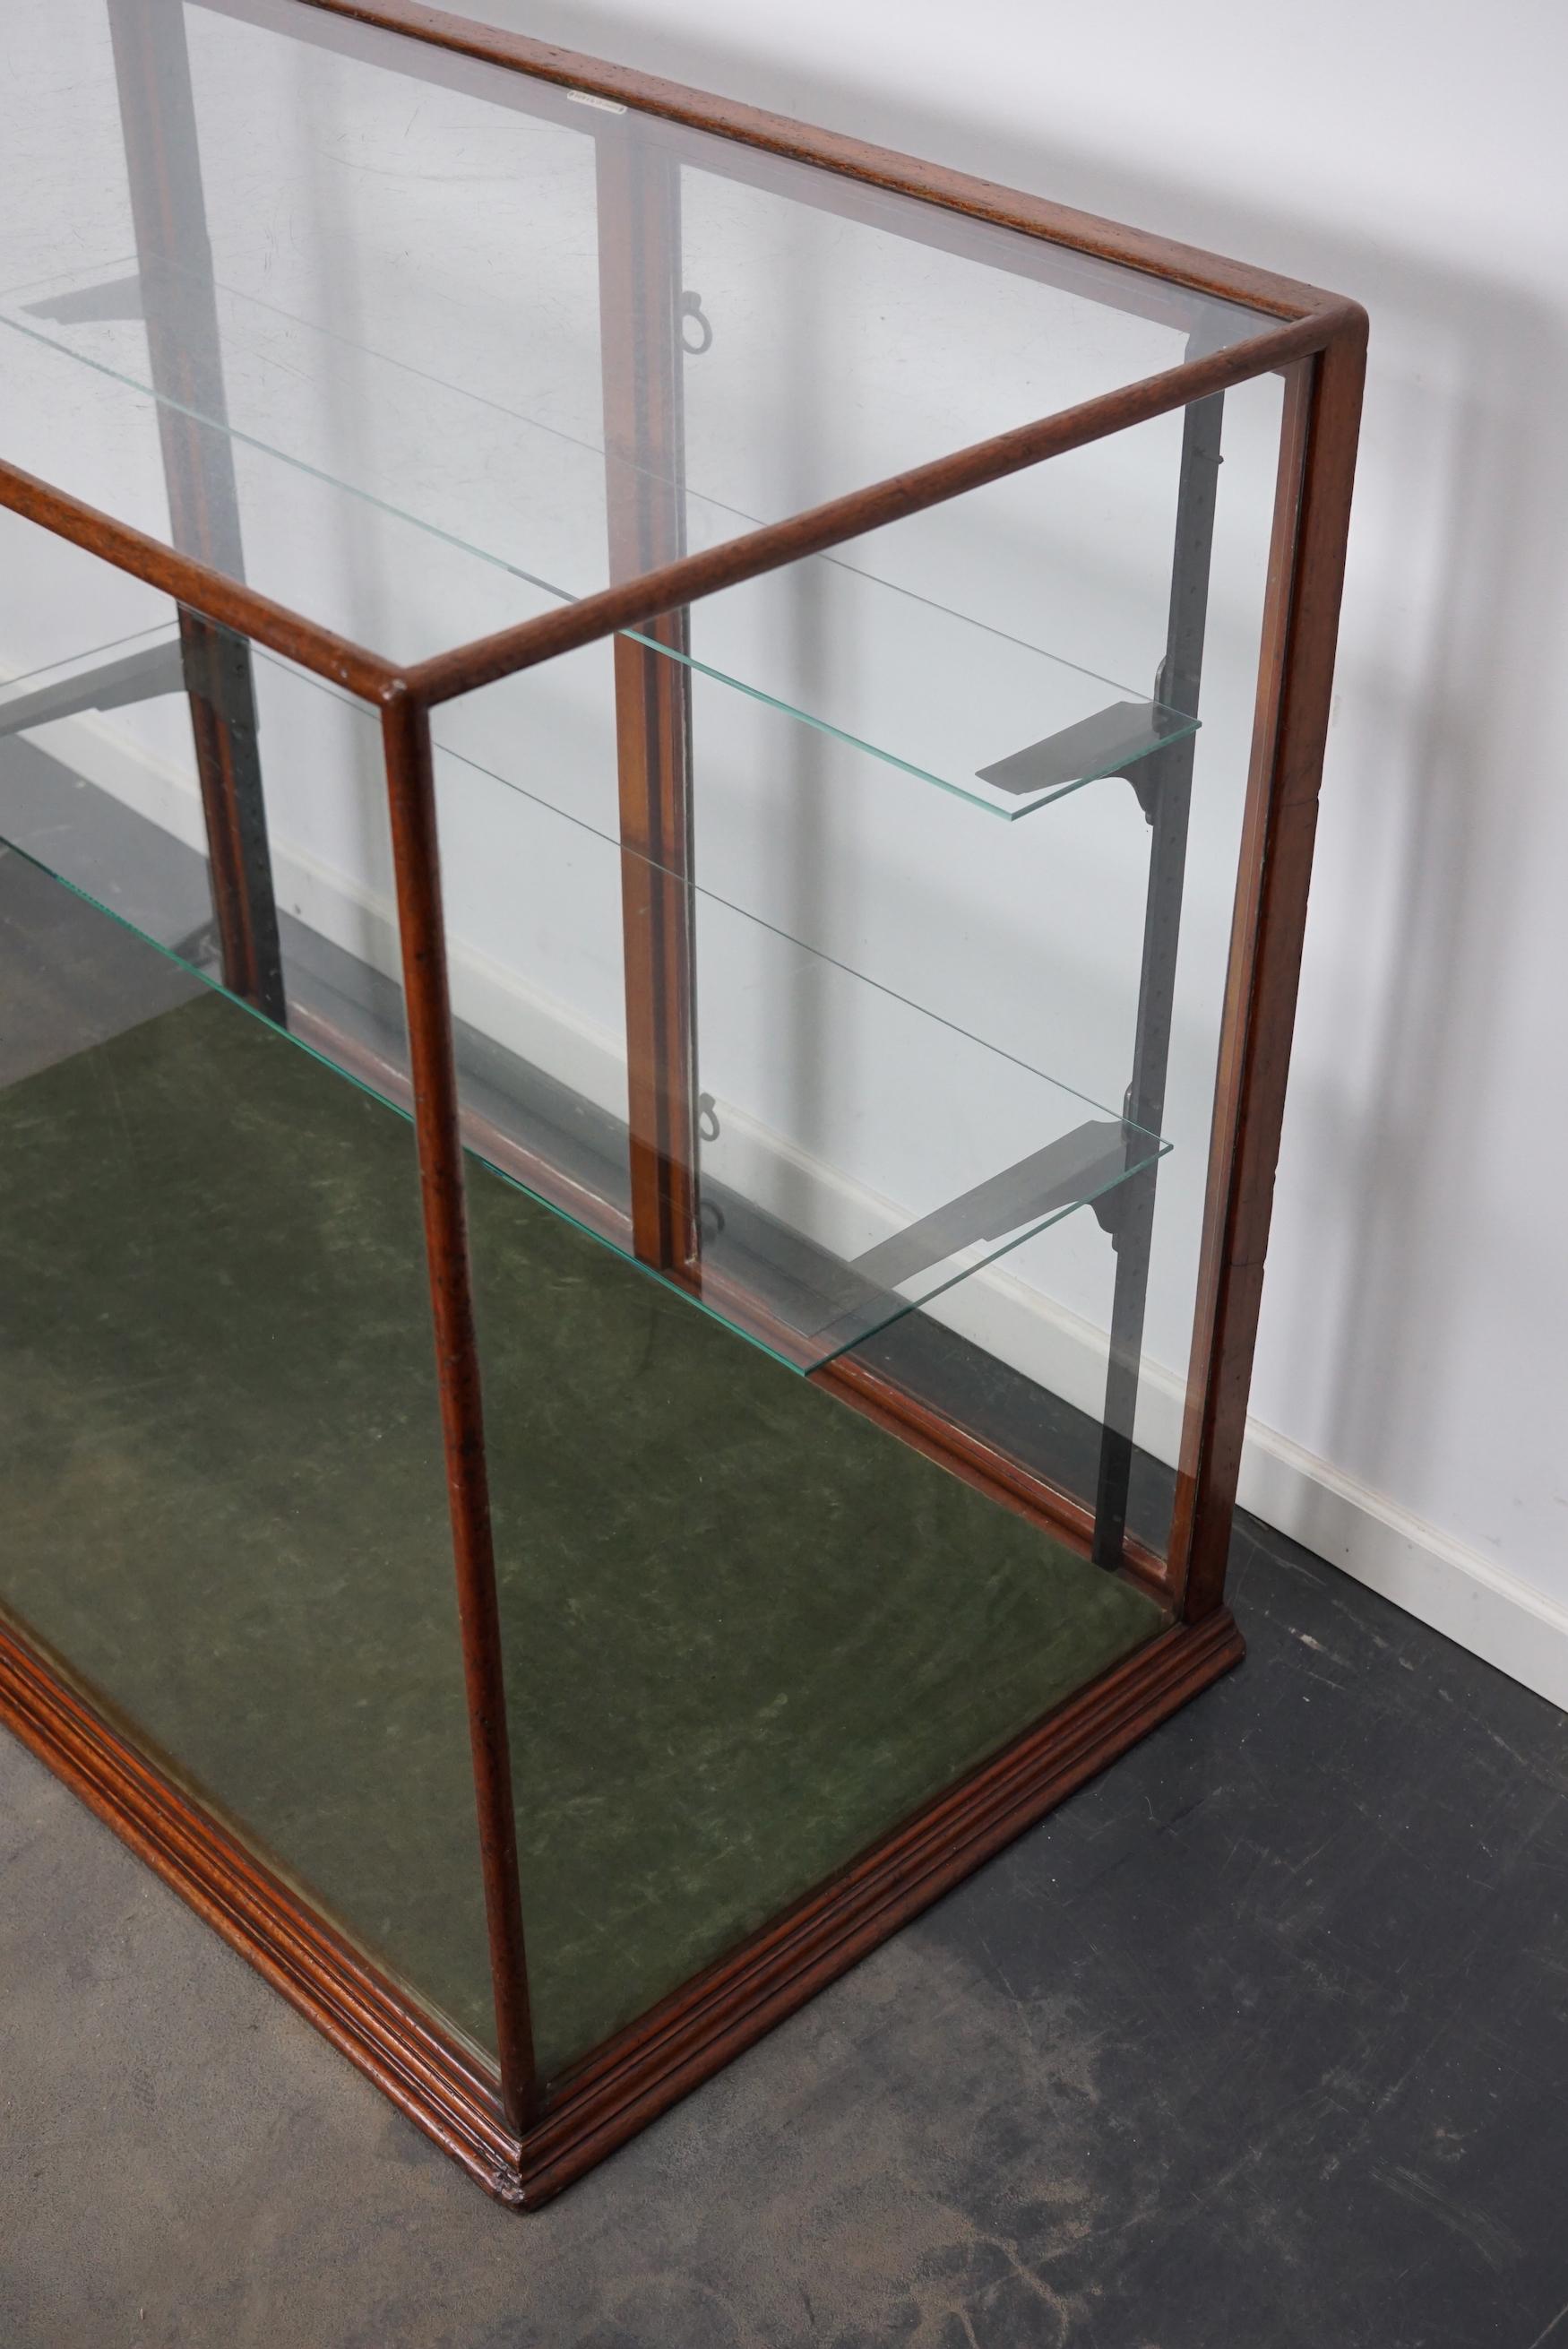 Victorian Mahogany Shop Display Cabinet / Counter or Vitrine, Late 19th Century For Sale 2